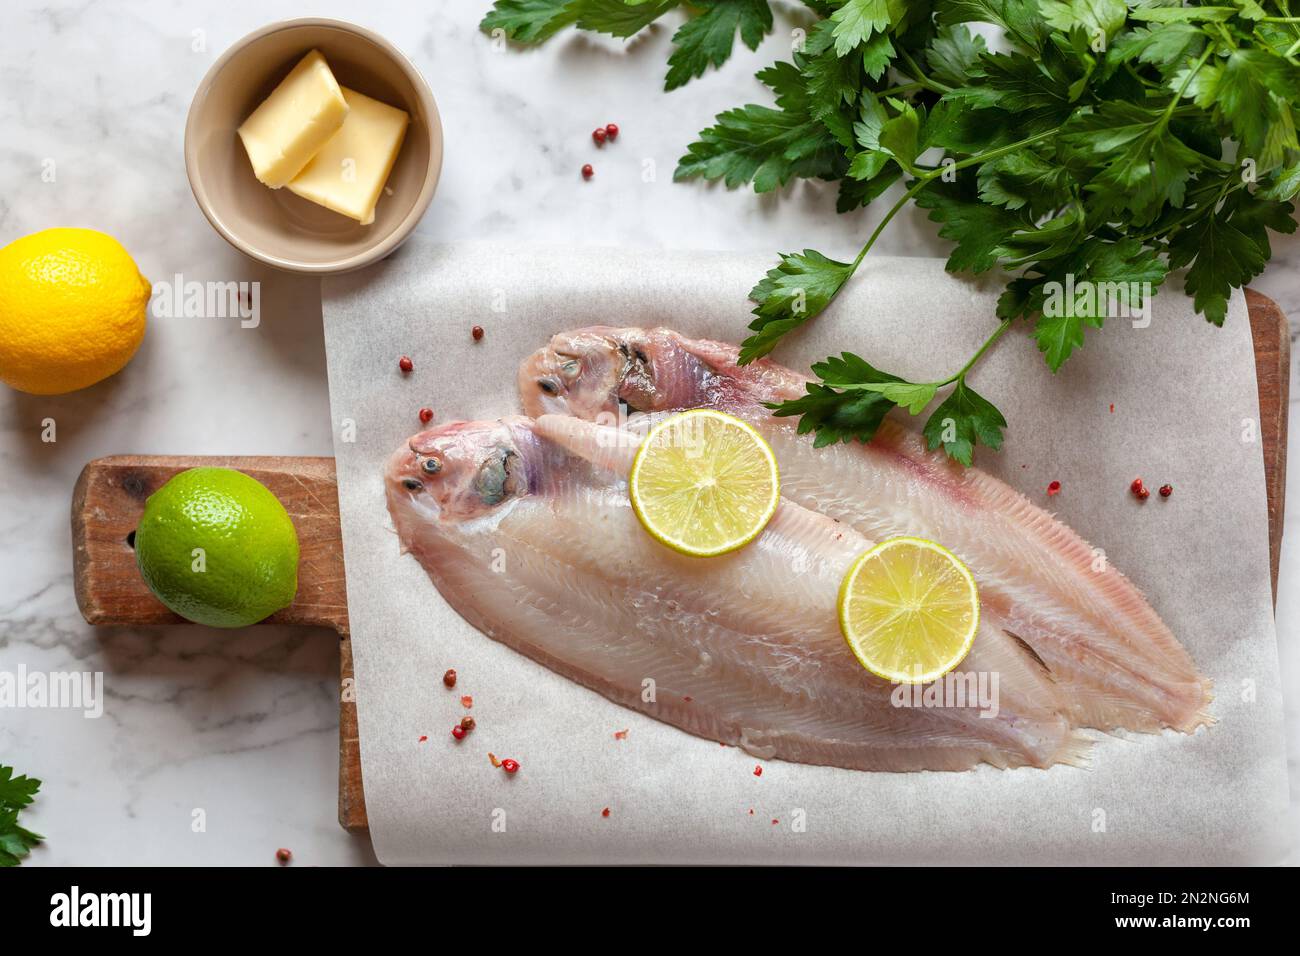 raw sole flatfish ready to be cooked meuniere style, french traditional recipe, top view Stock Photo